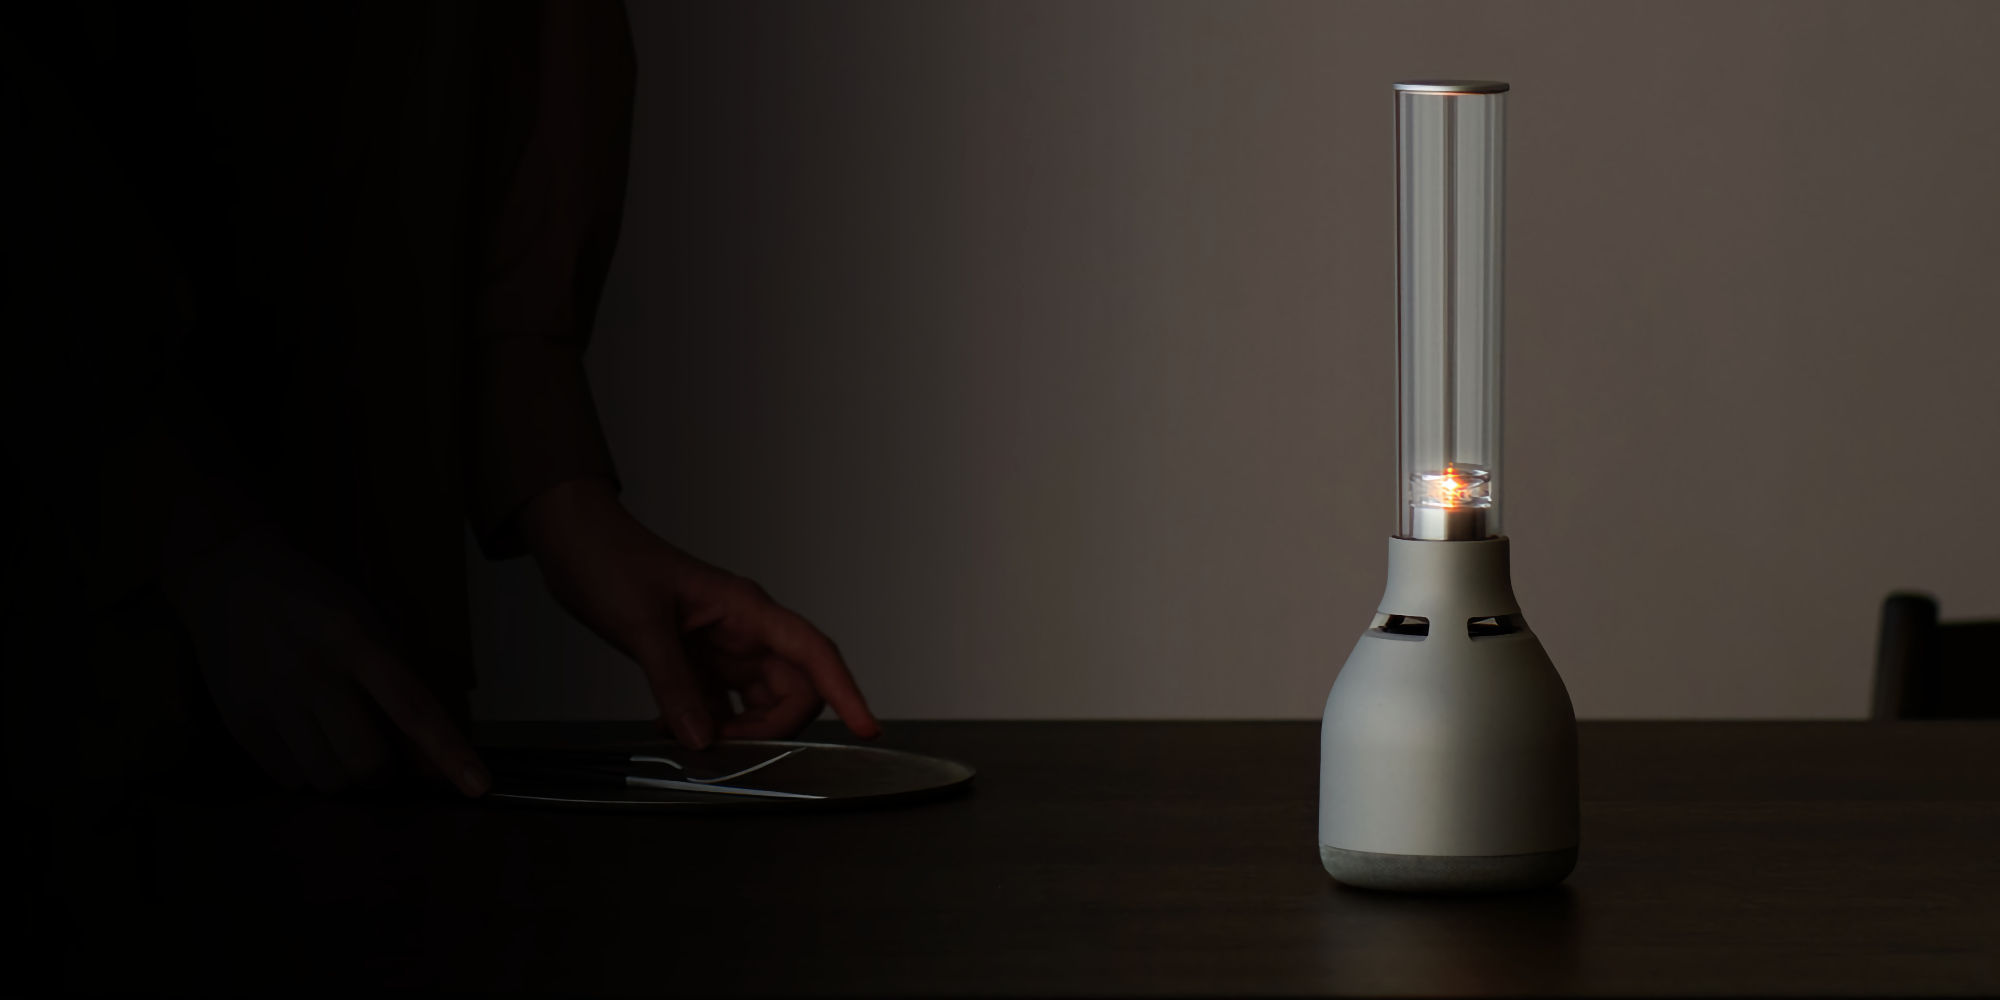 Sony's new glass speaker is also a lamp with 8-hour battery life